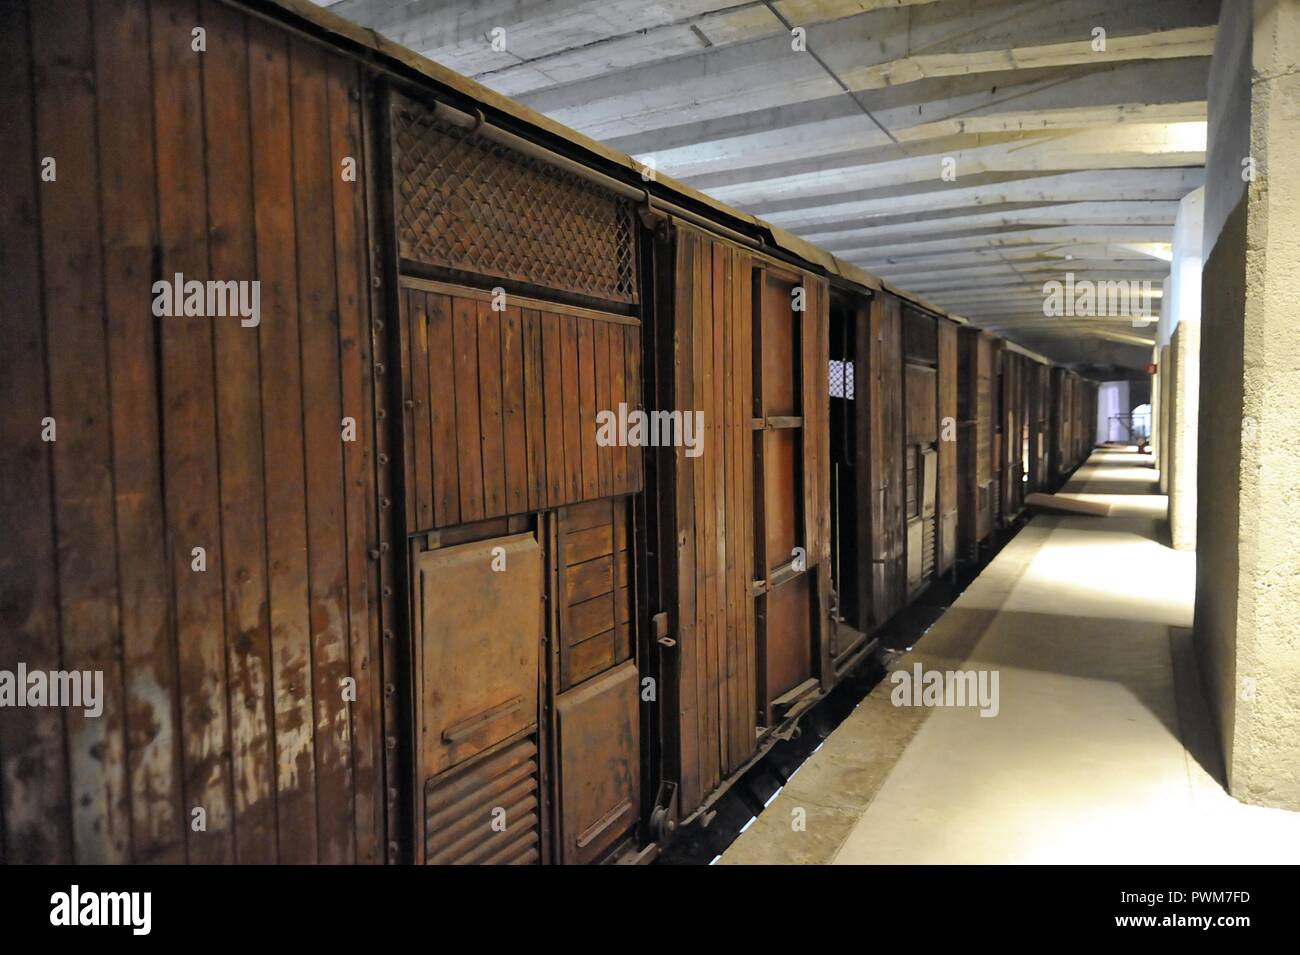 Milan (Italy), Memorial of the Shoah, at Track 21 in the basement of the Central Station, from where trains departed for the nazi concentration camps Stock Photo